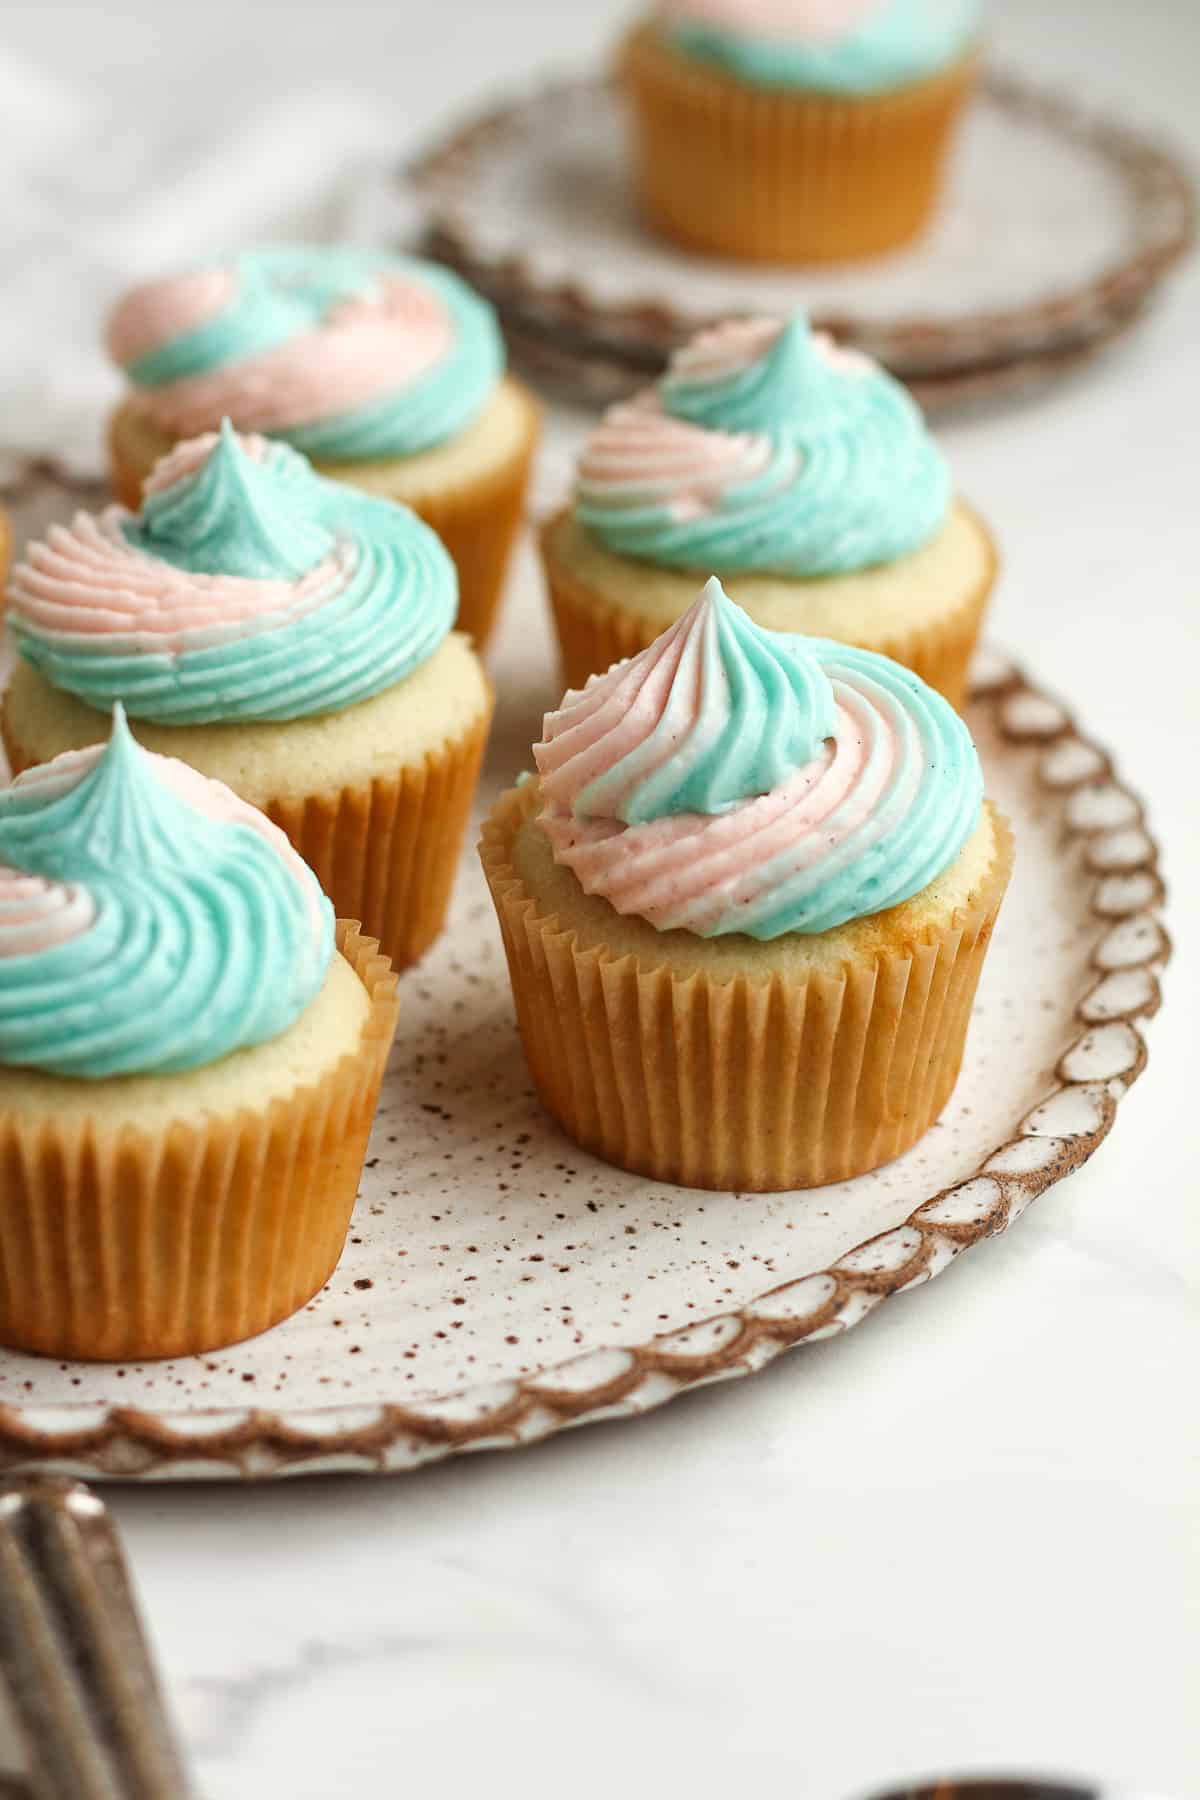 Side view of some vanilla cupcakes with swirl frosting.